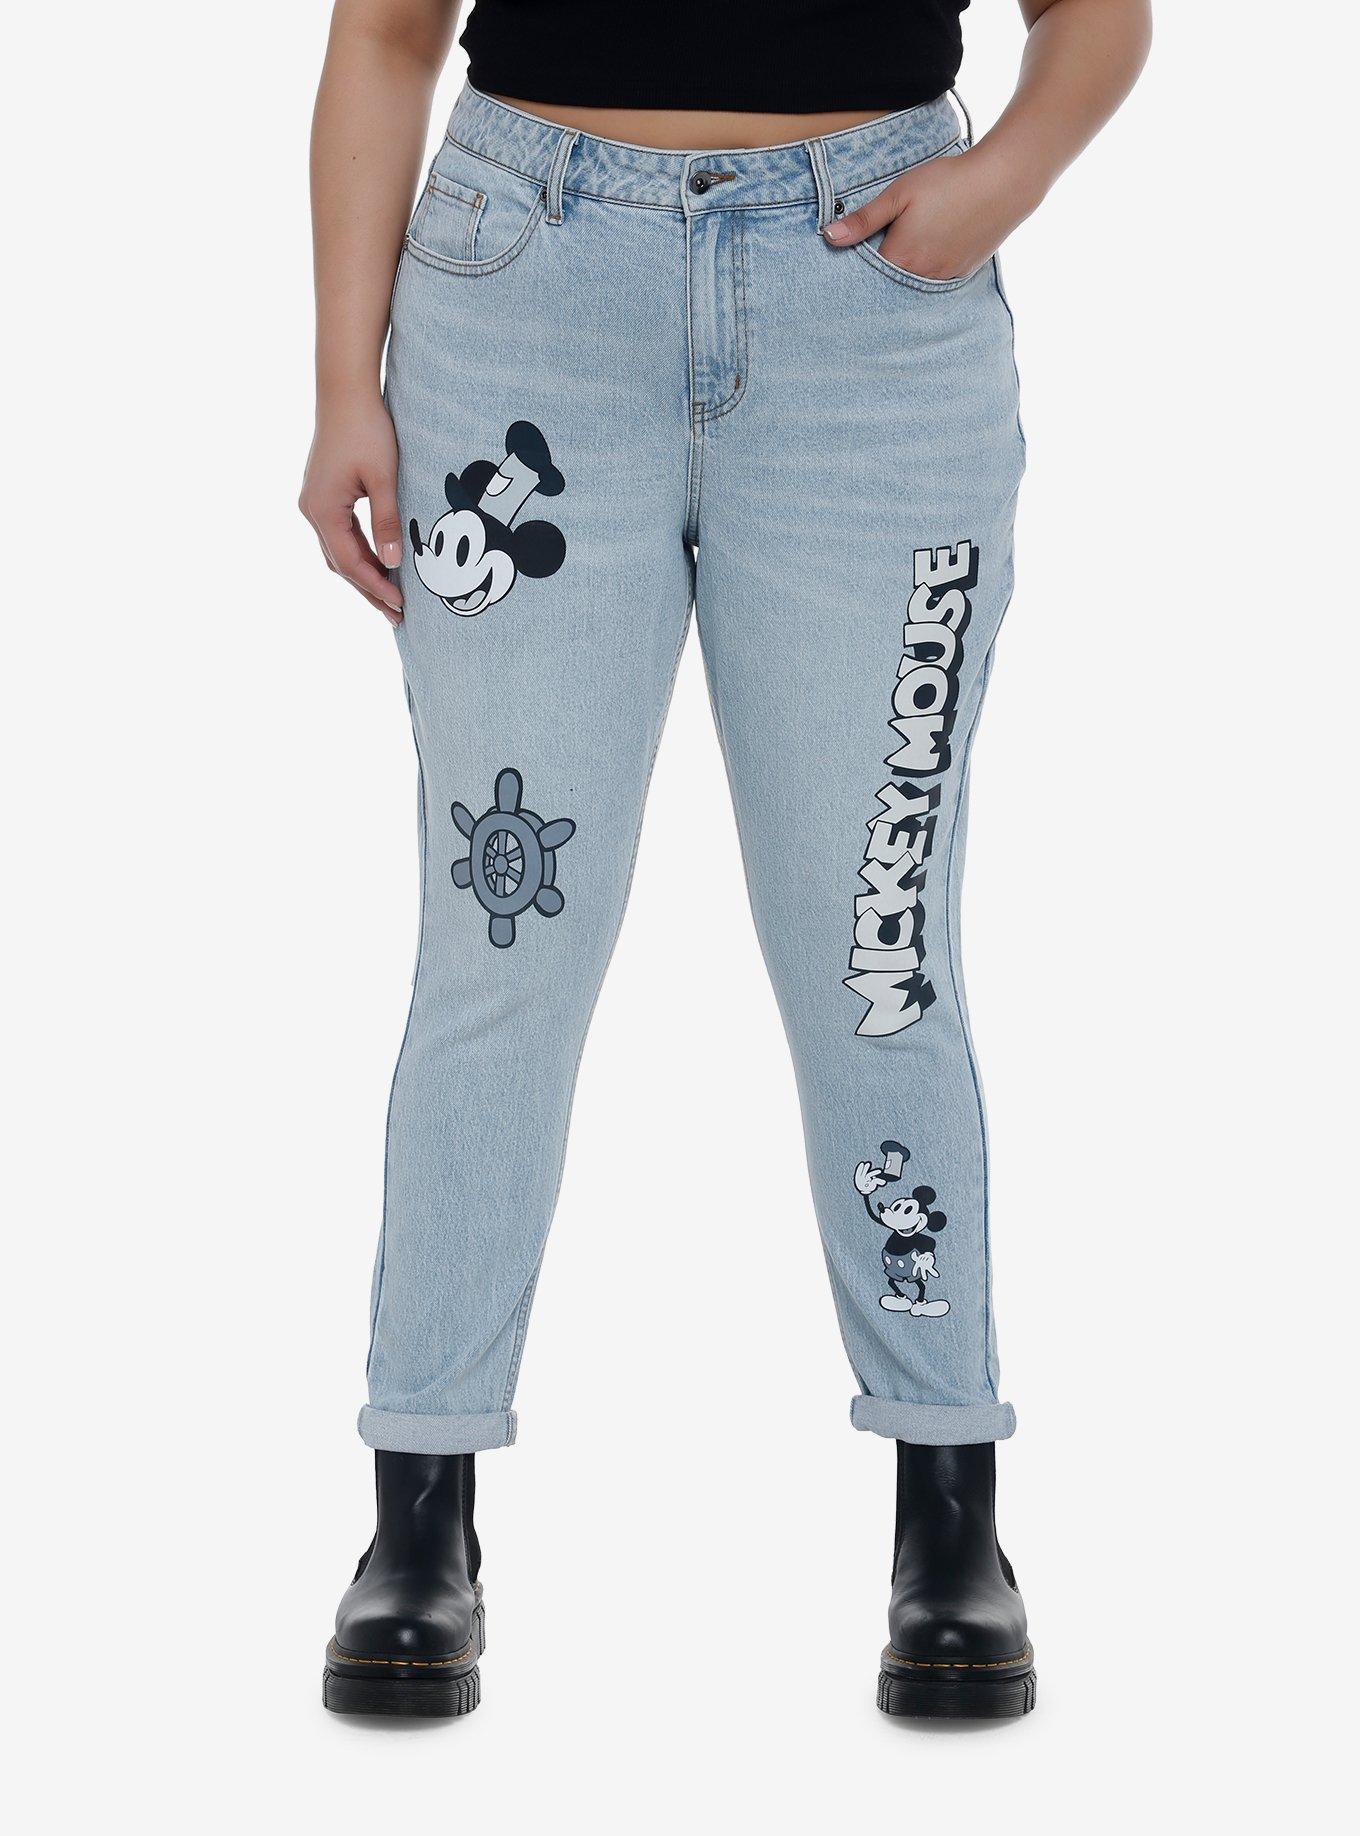 Disney Mickey Mouse Steamboat Willie Mom Jeans Plus Size, LIGHT WASH, hi-res